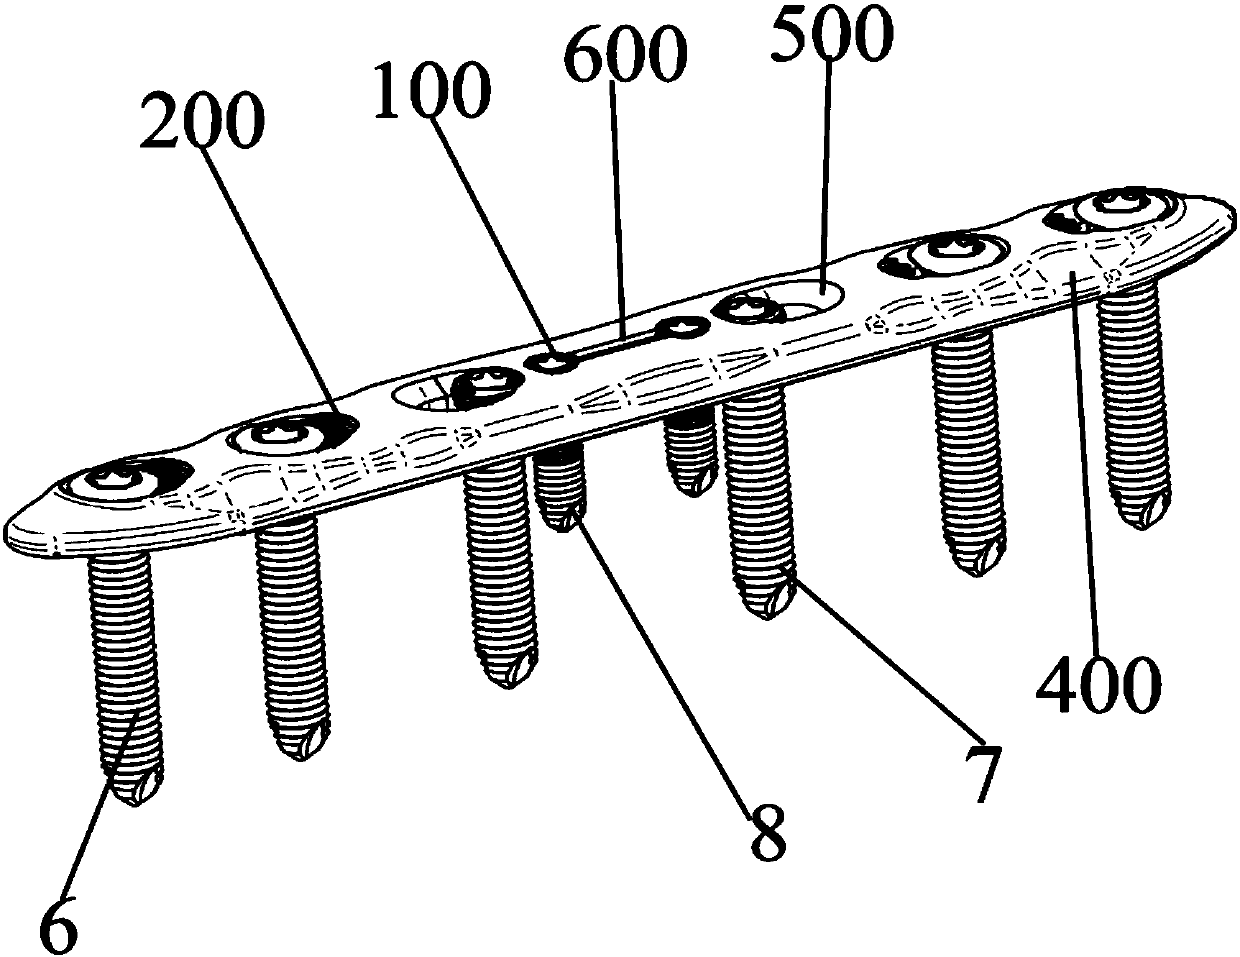 Stress pattern pressuring and locking osteosynthesis device